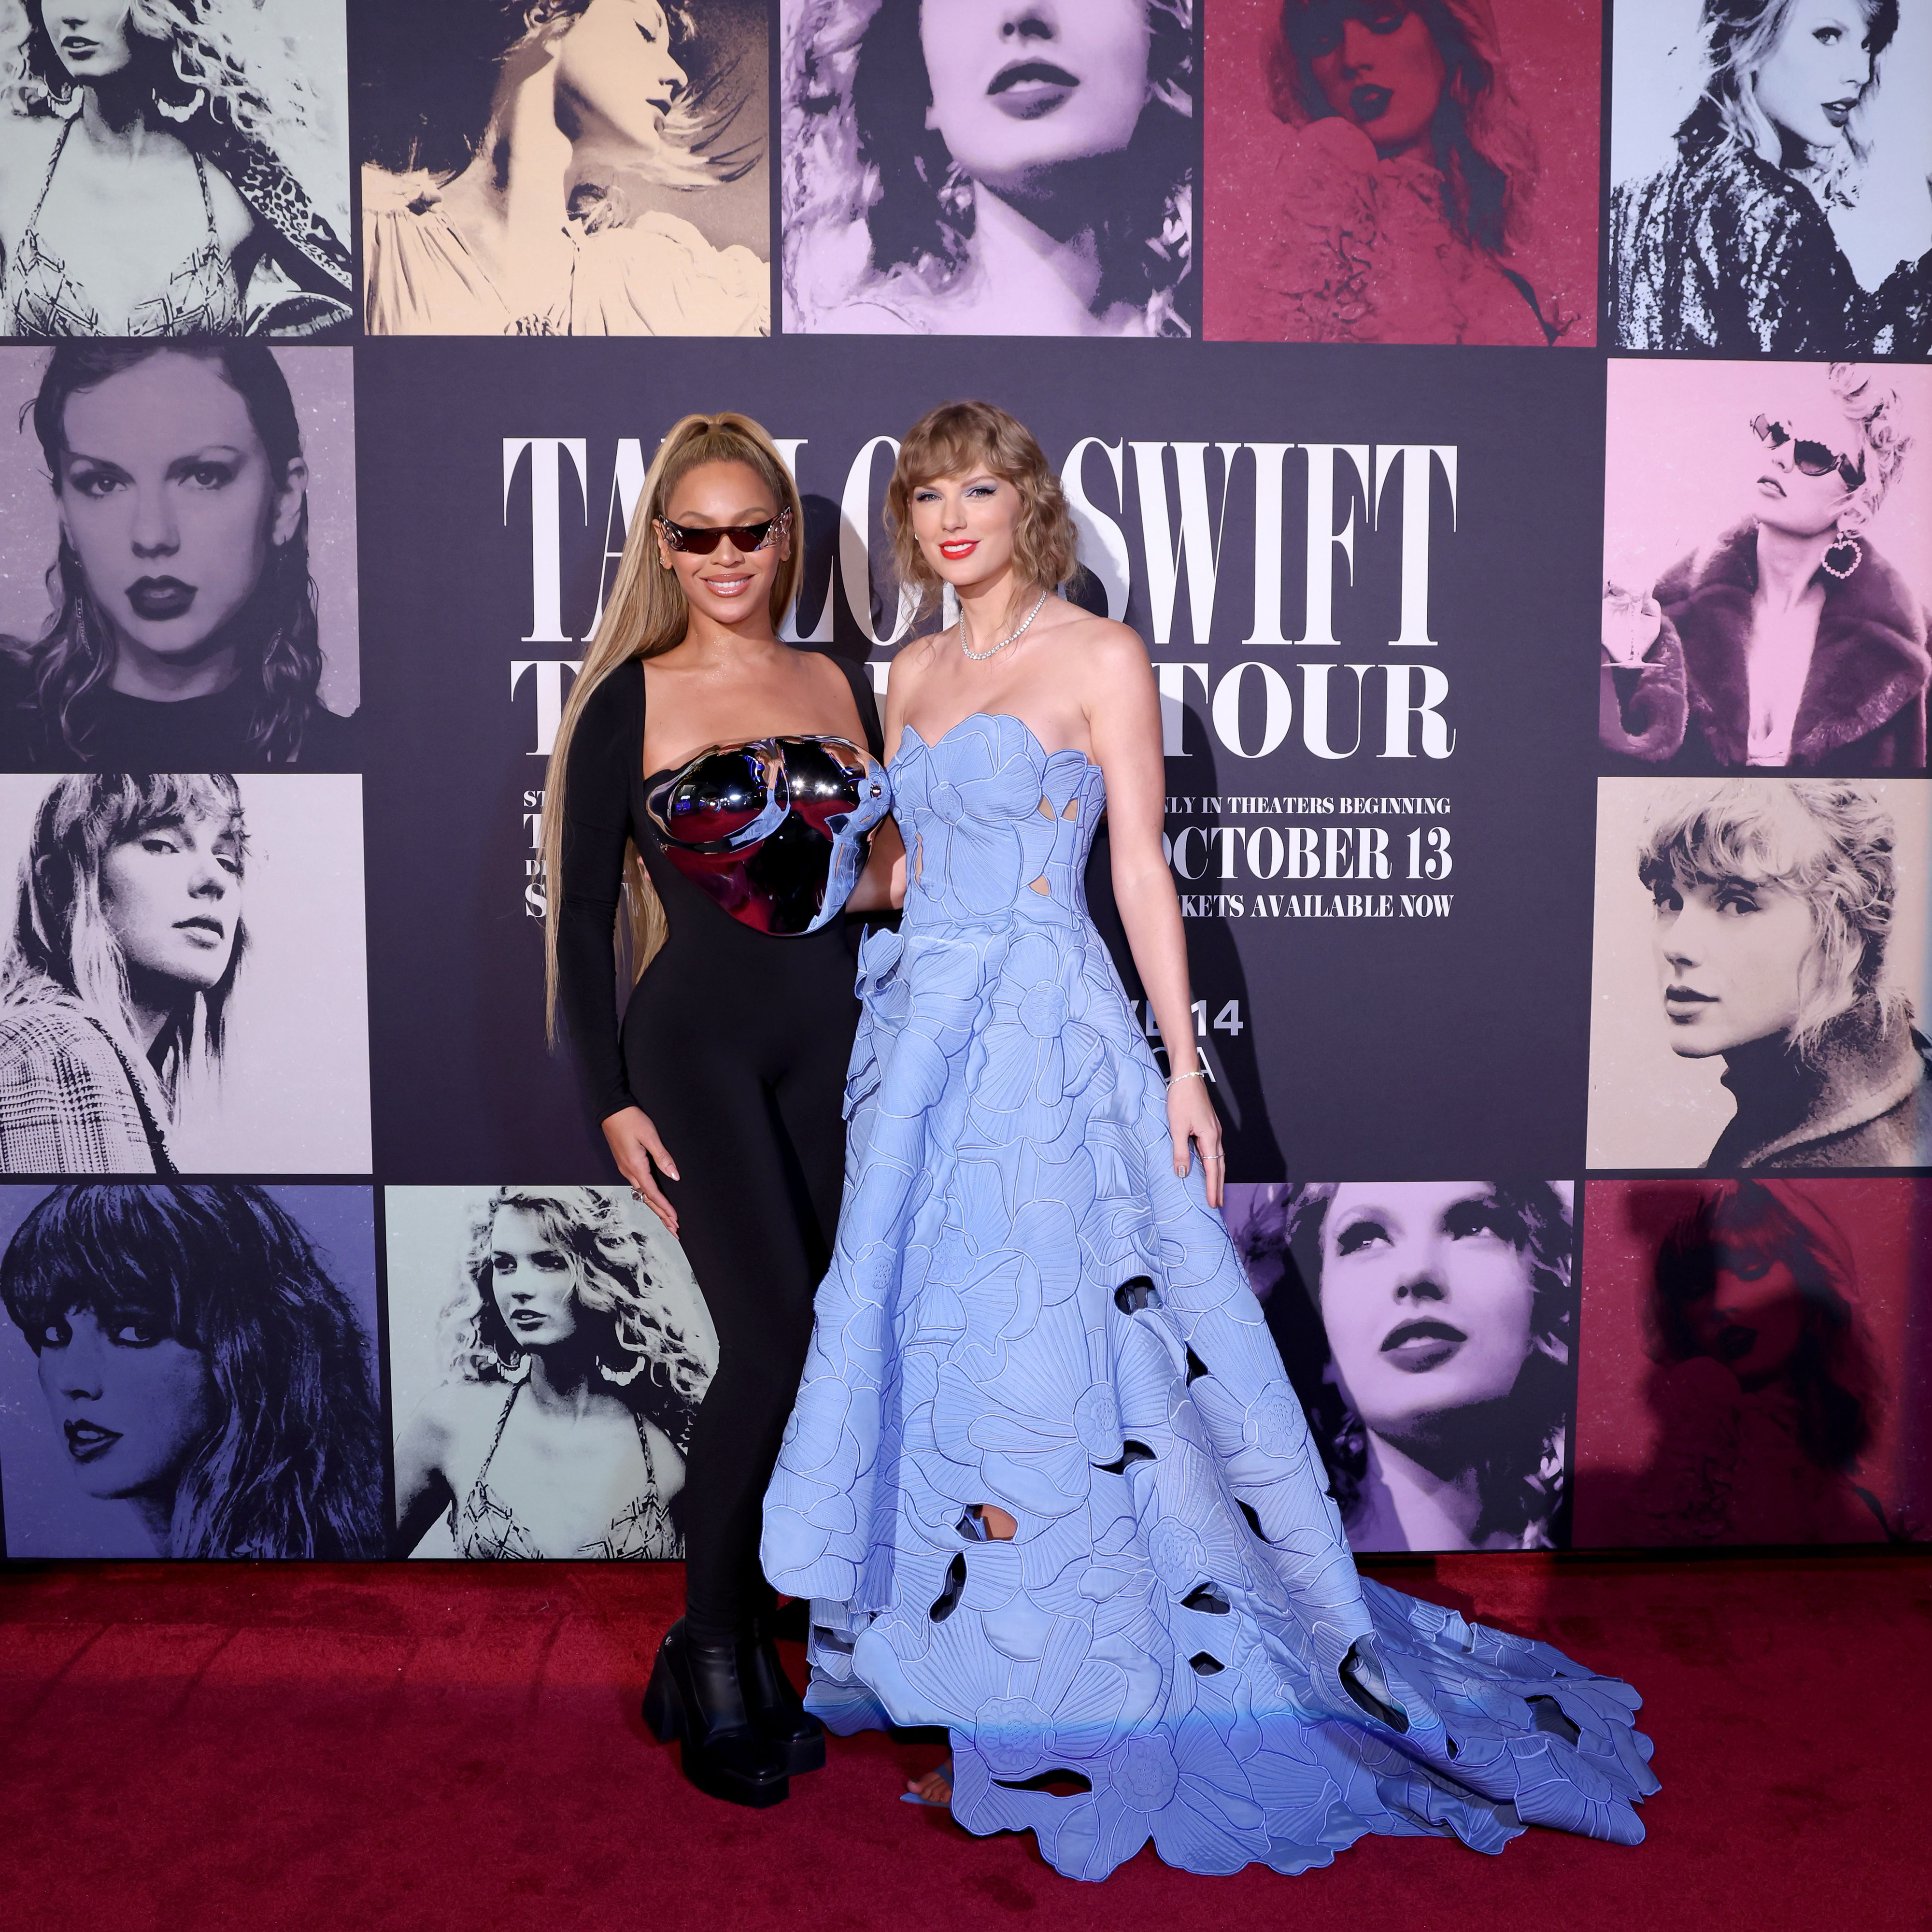 Beyoncé and Taylor Swift on the red carpet